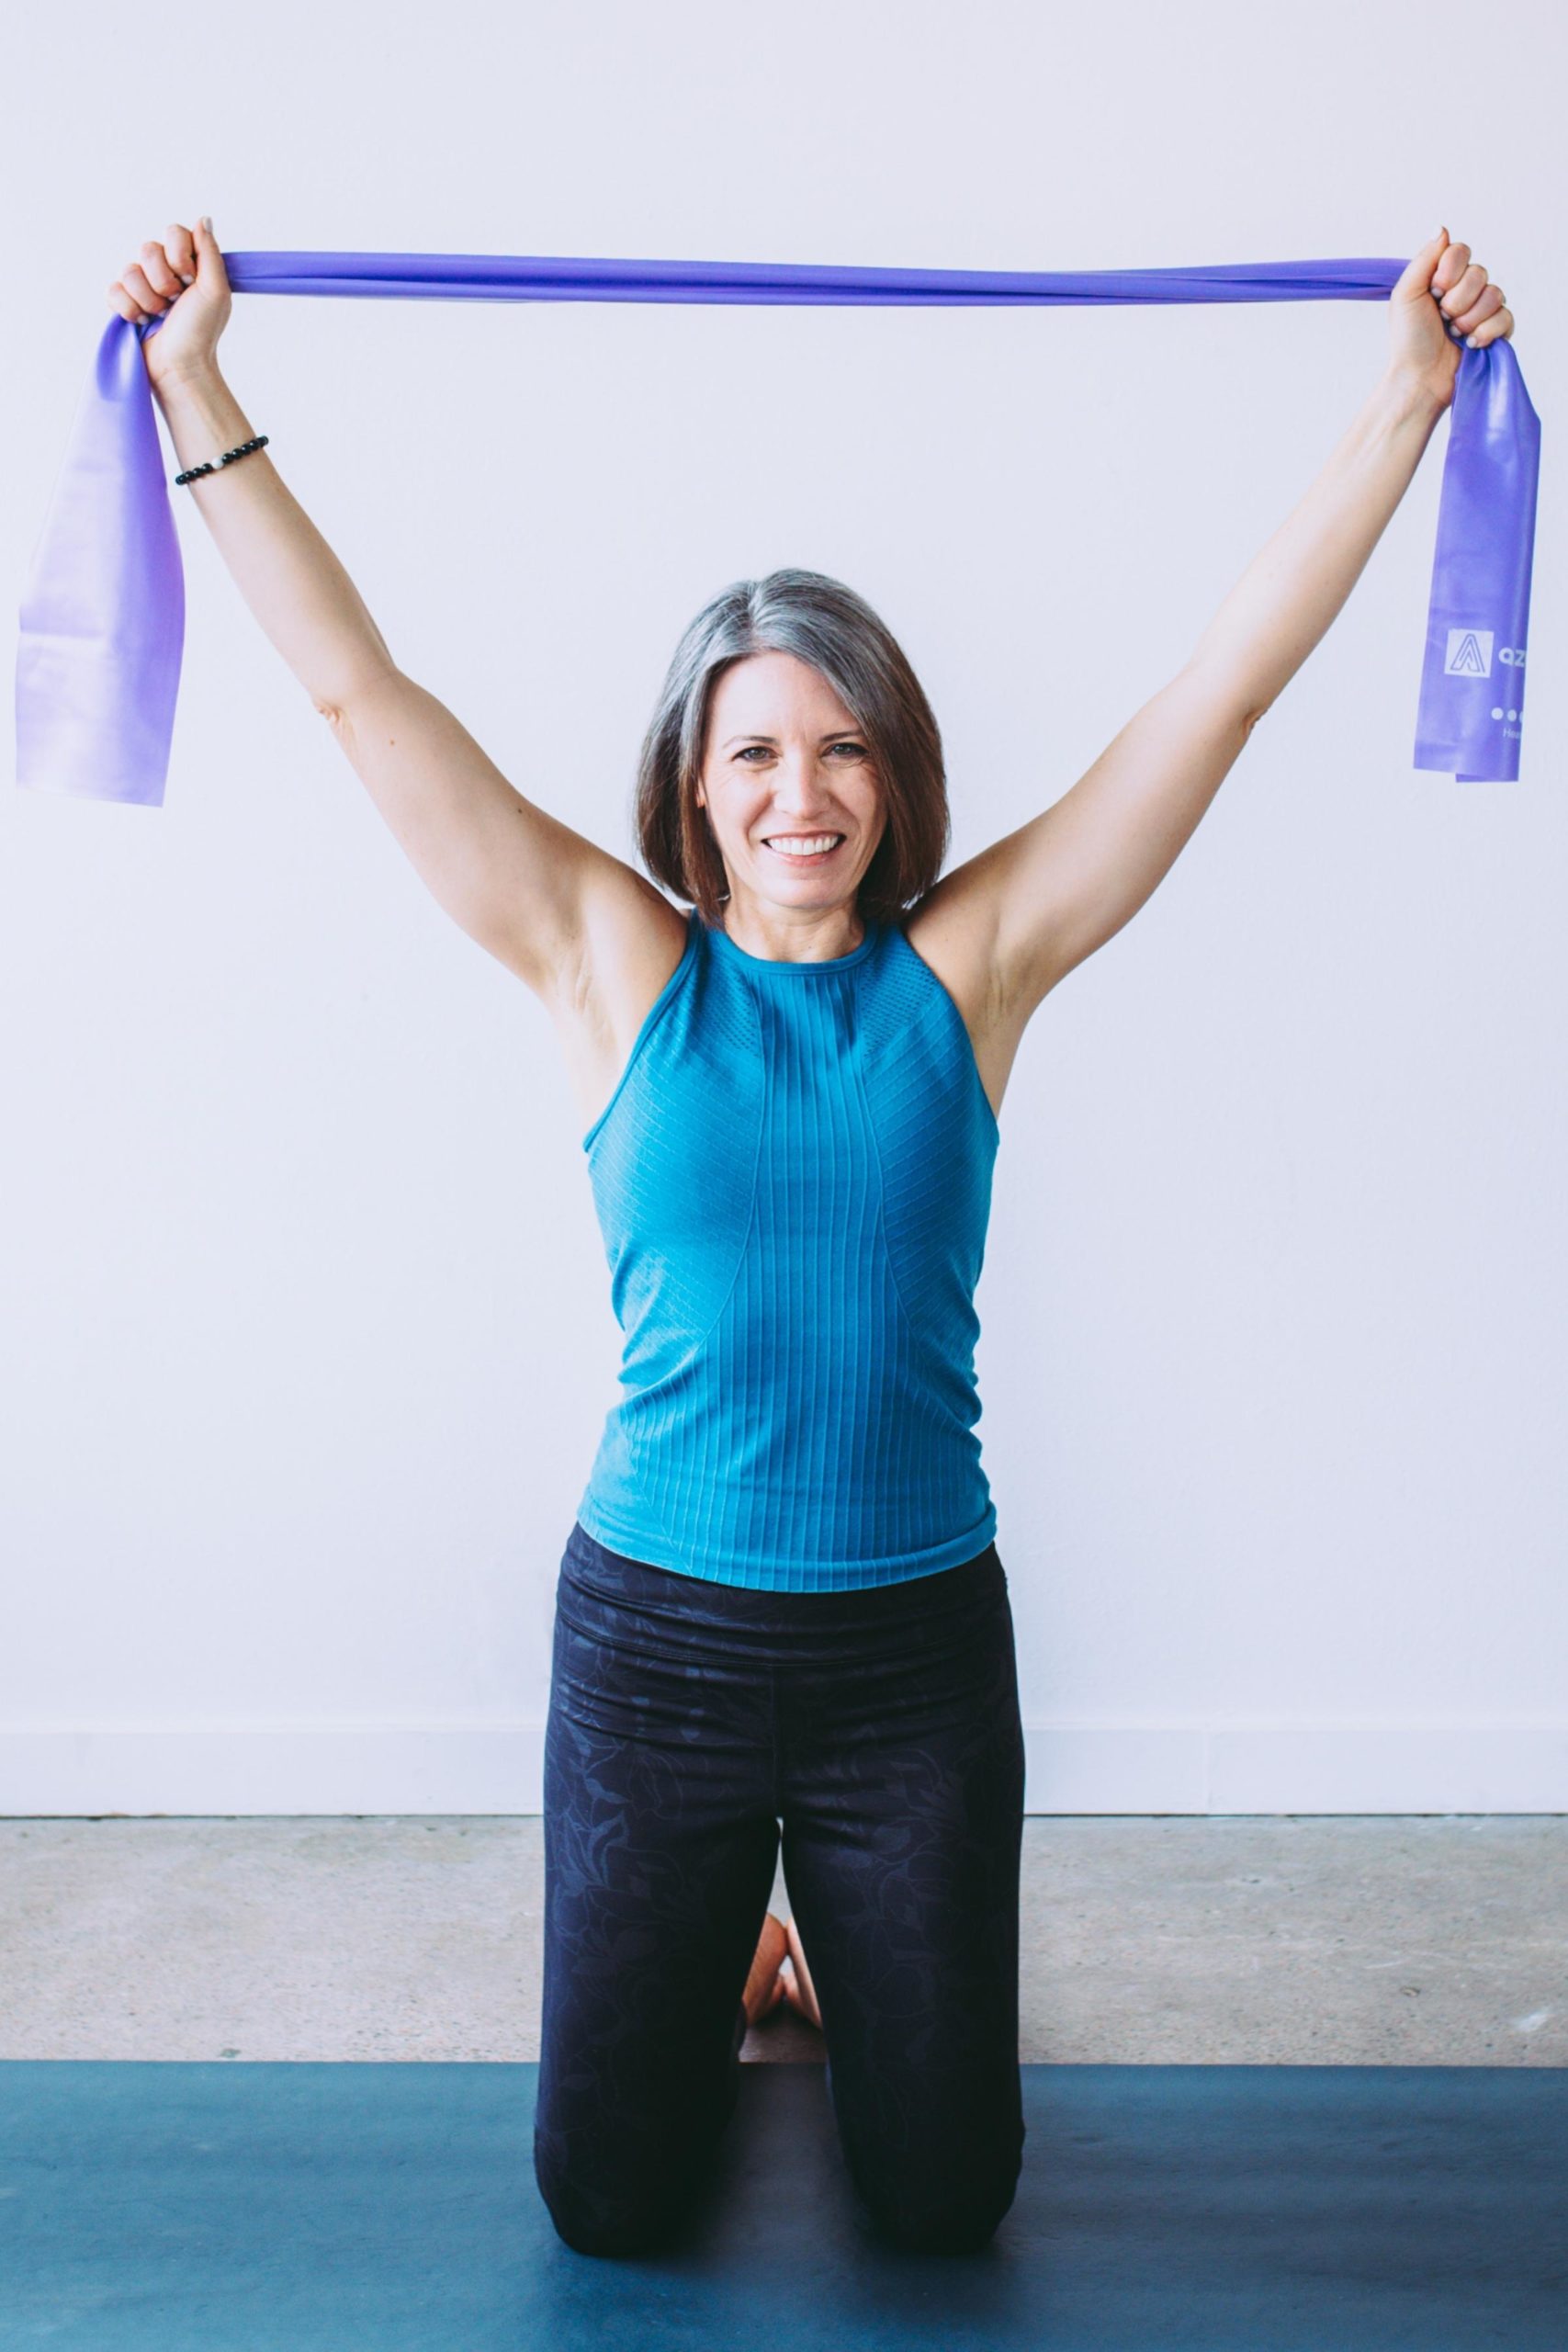 Beth kneeling on Pilates mat holding onto purple resistance band and reaching arms to the ceiling. Wearing teal top and black leggings. 